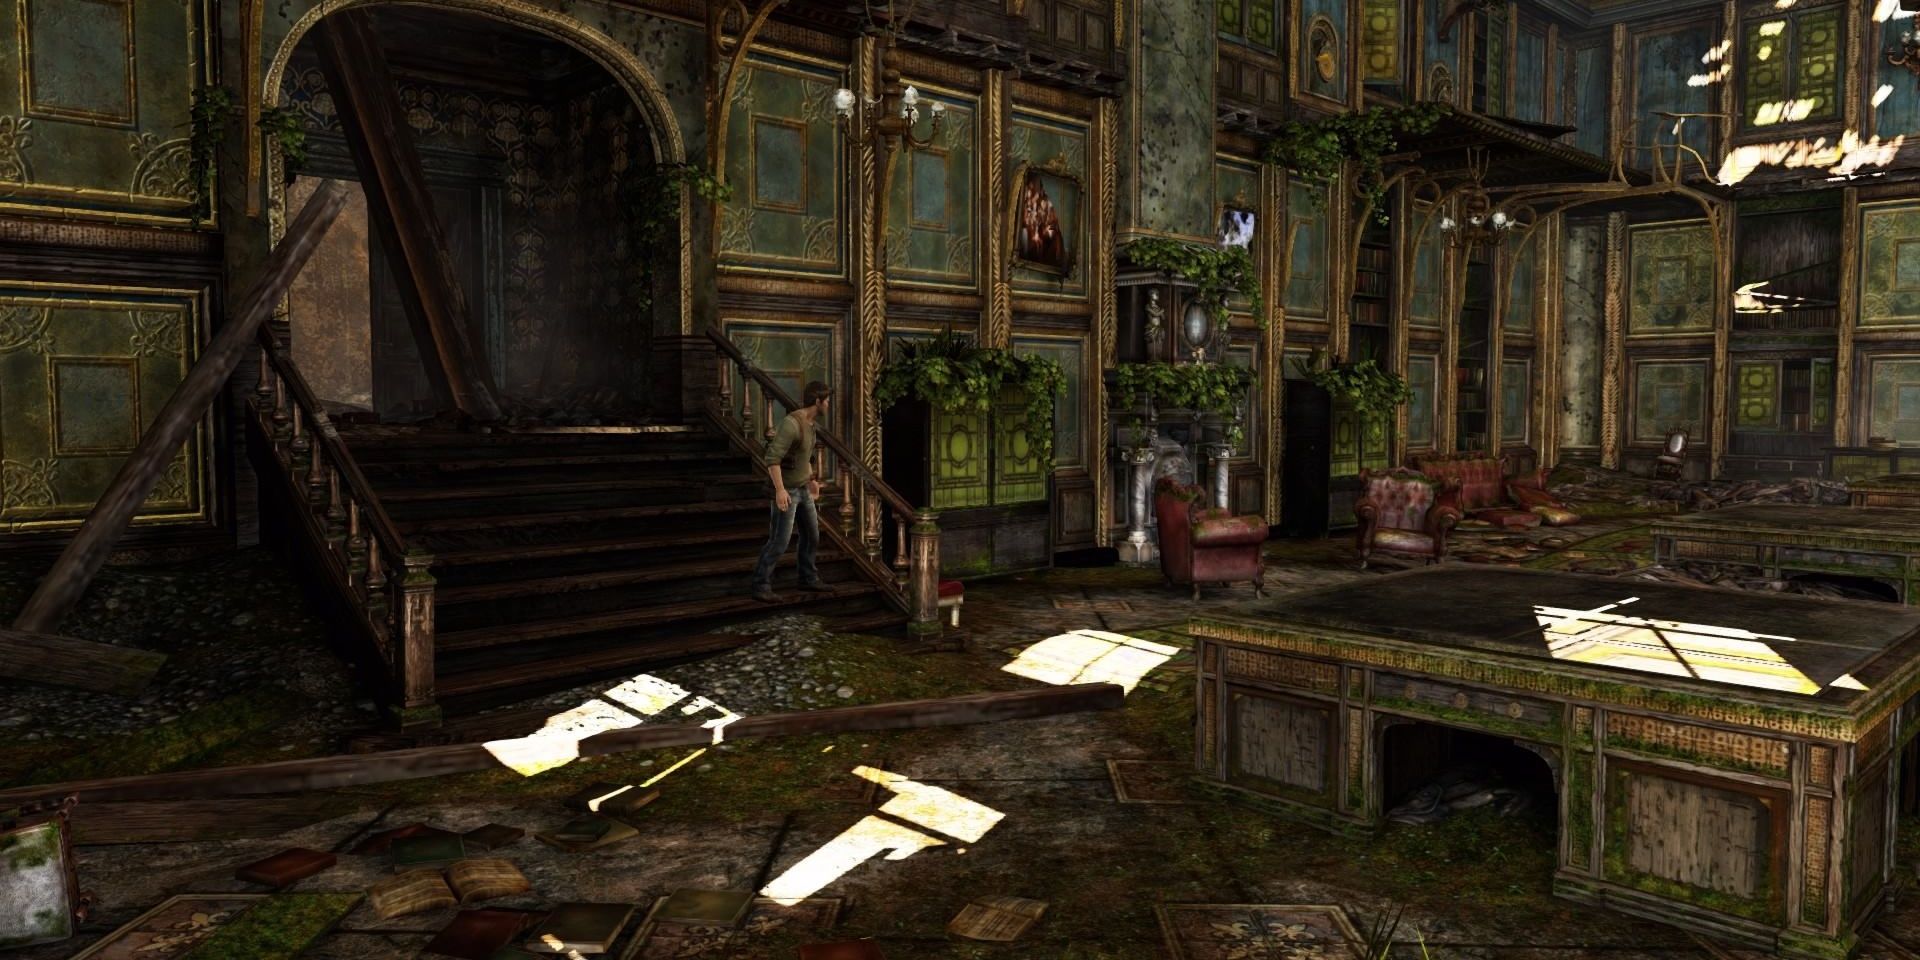 The French Chateau in Uncharted